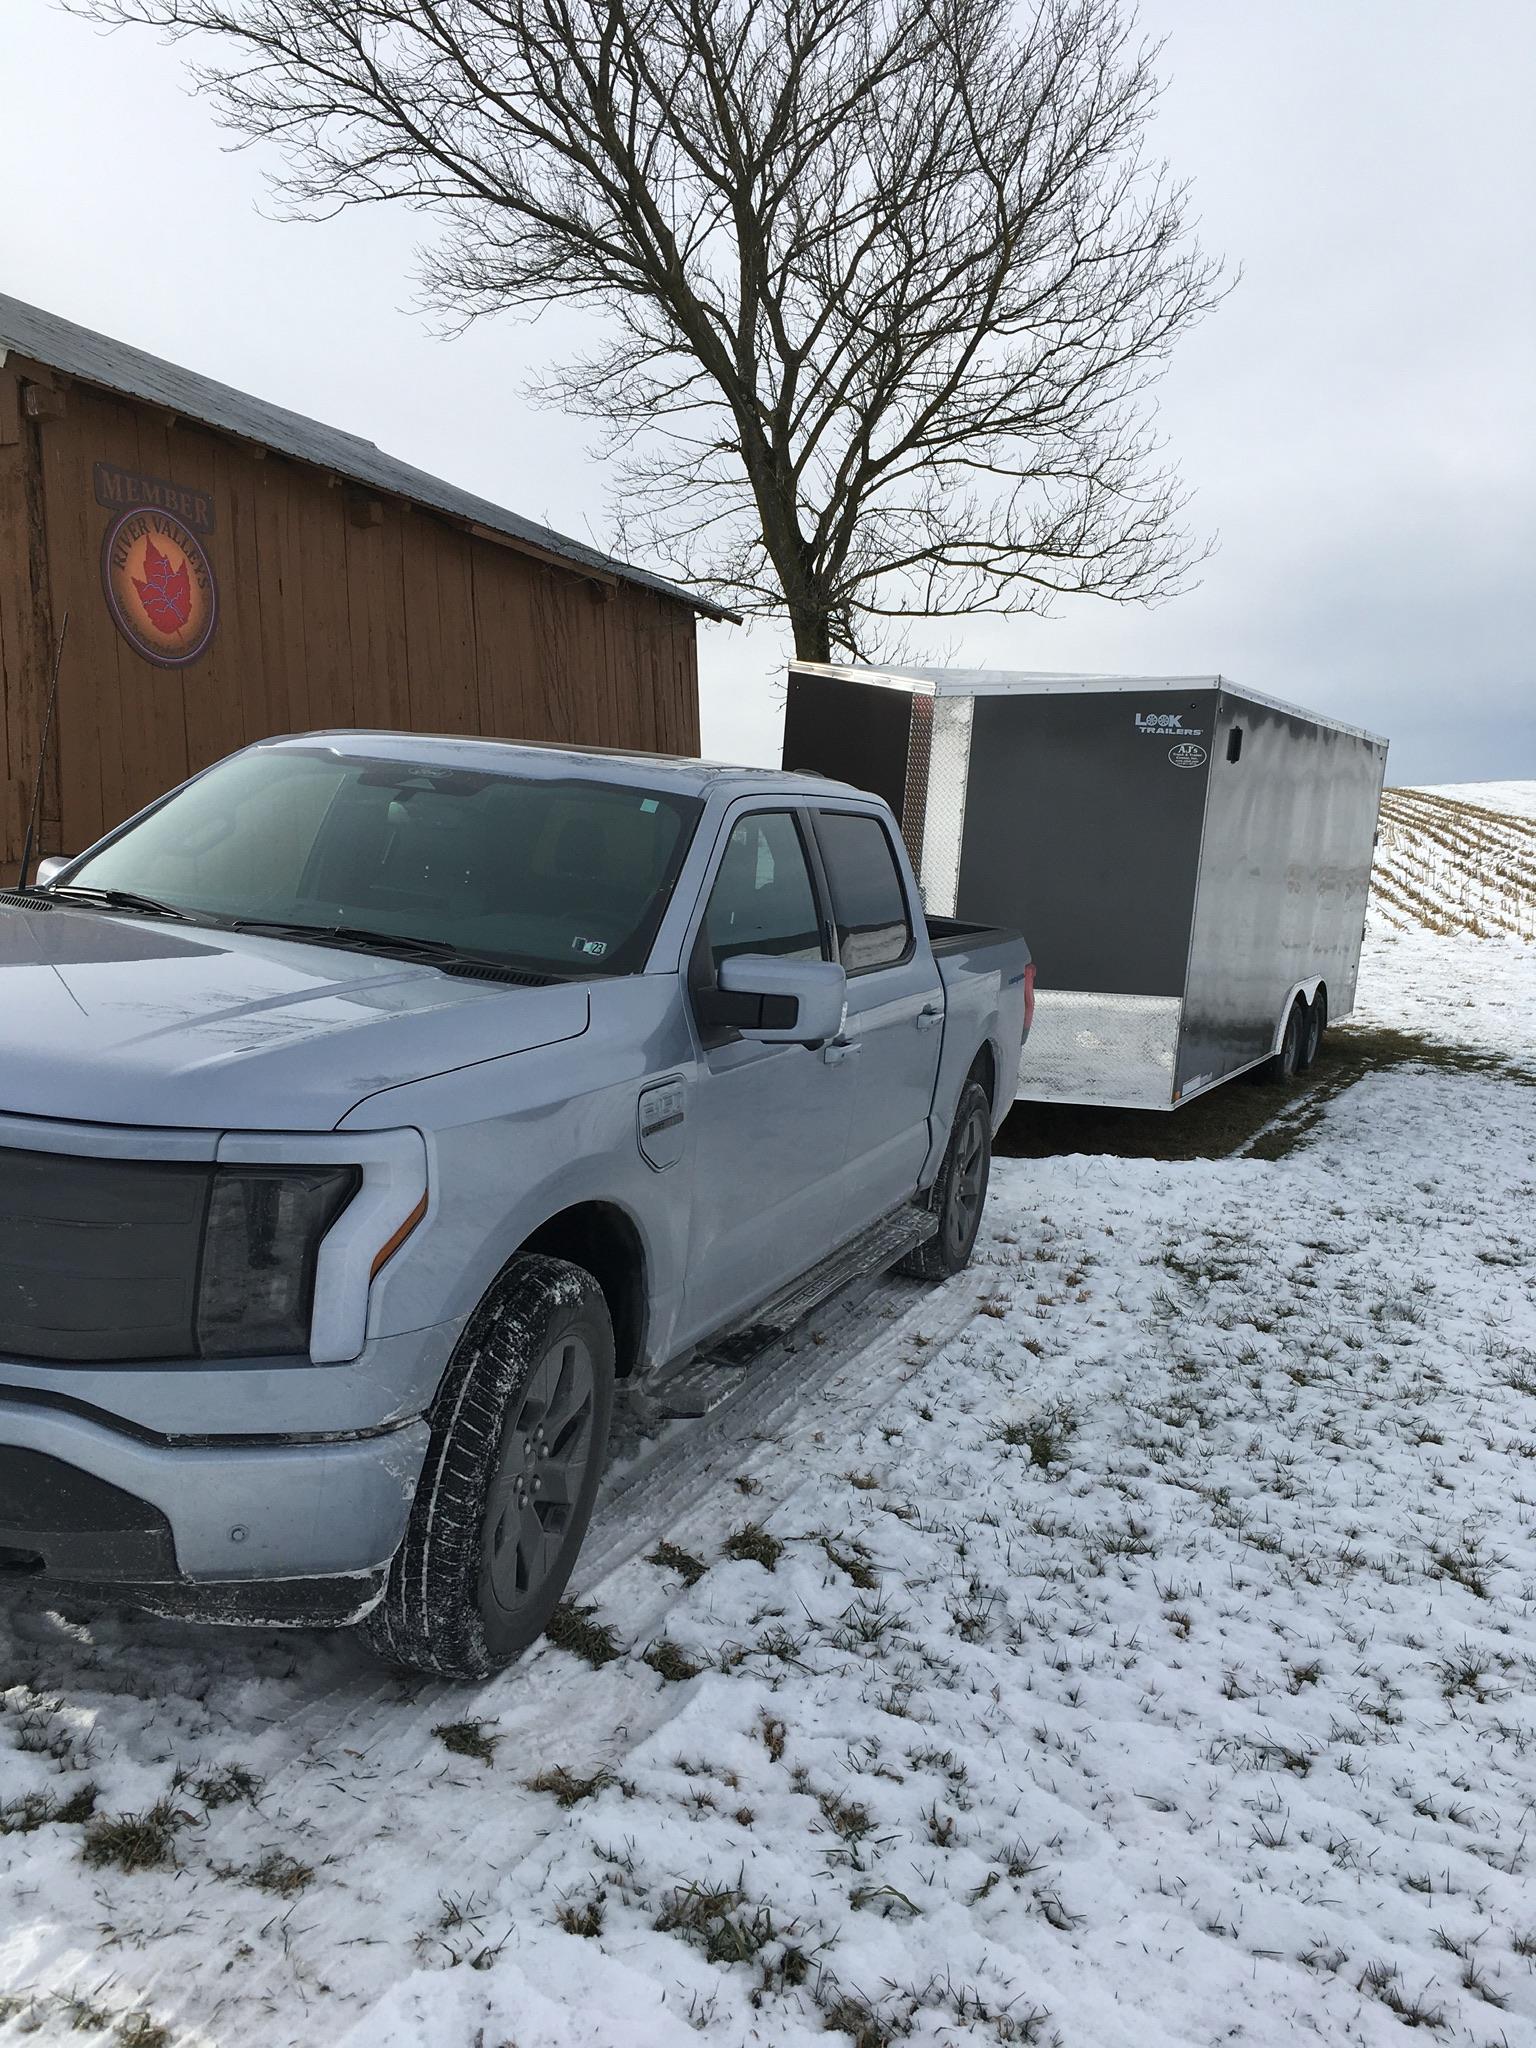 Ford F-150 Lightning I towed a brick (box trailer) in sub-freezing temperatures and the Lightning did great! 71D7E1AA-9077-41AE-8340-9BBD18F086C8